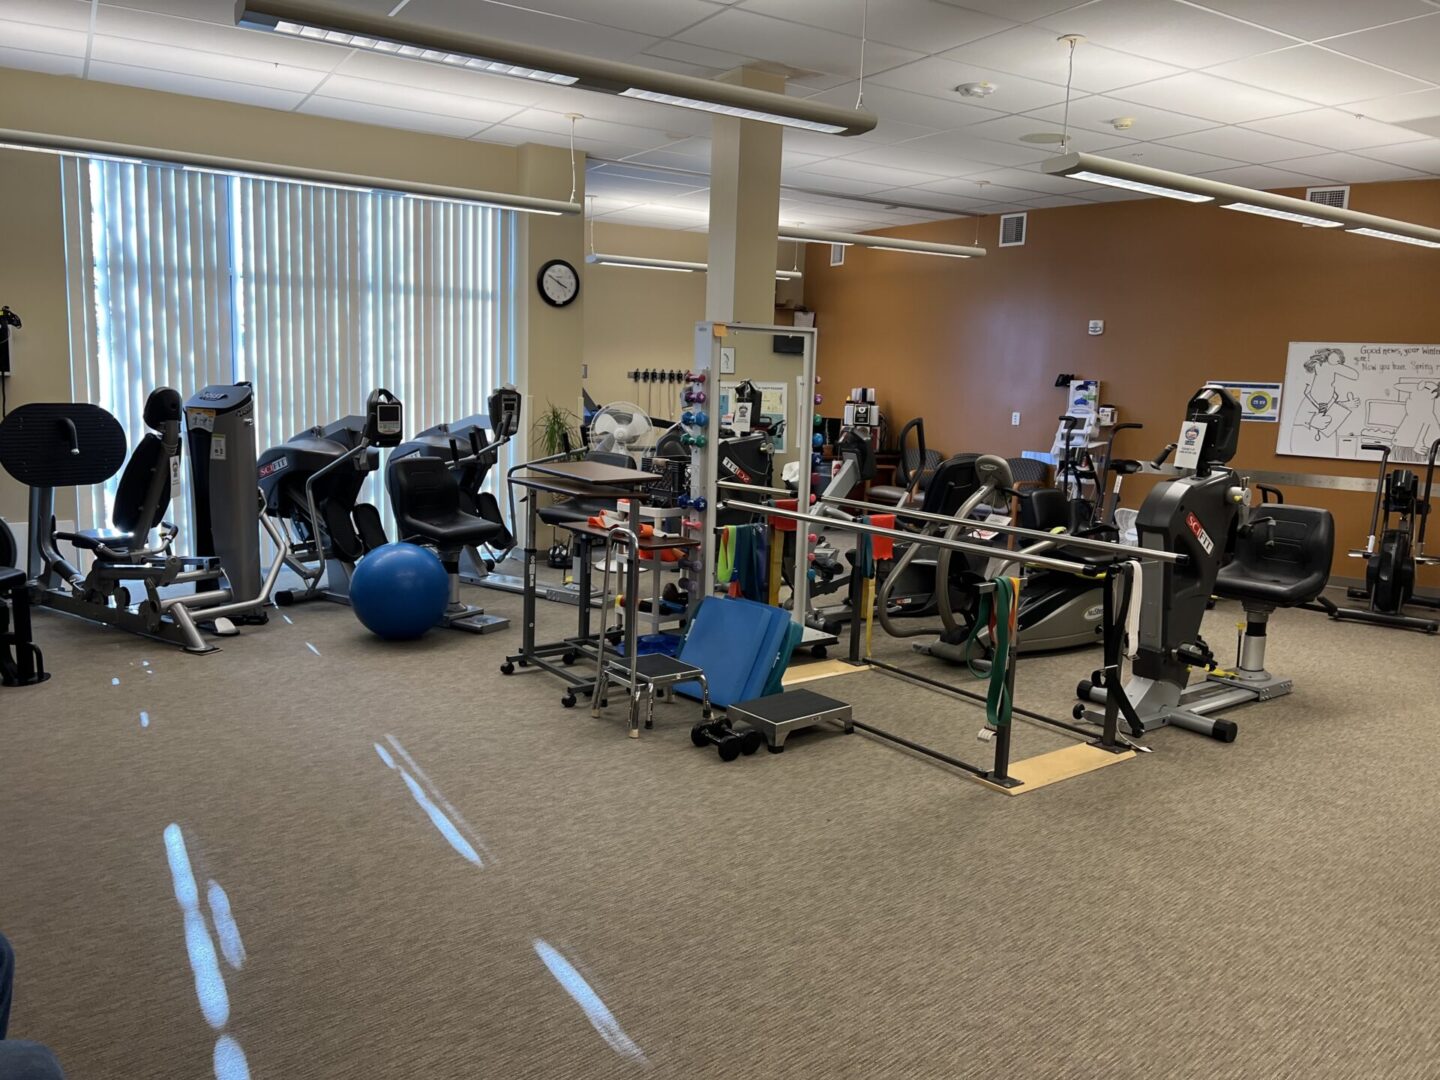 A room filled with people in exercise equipment.